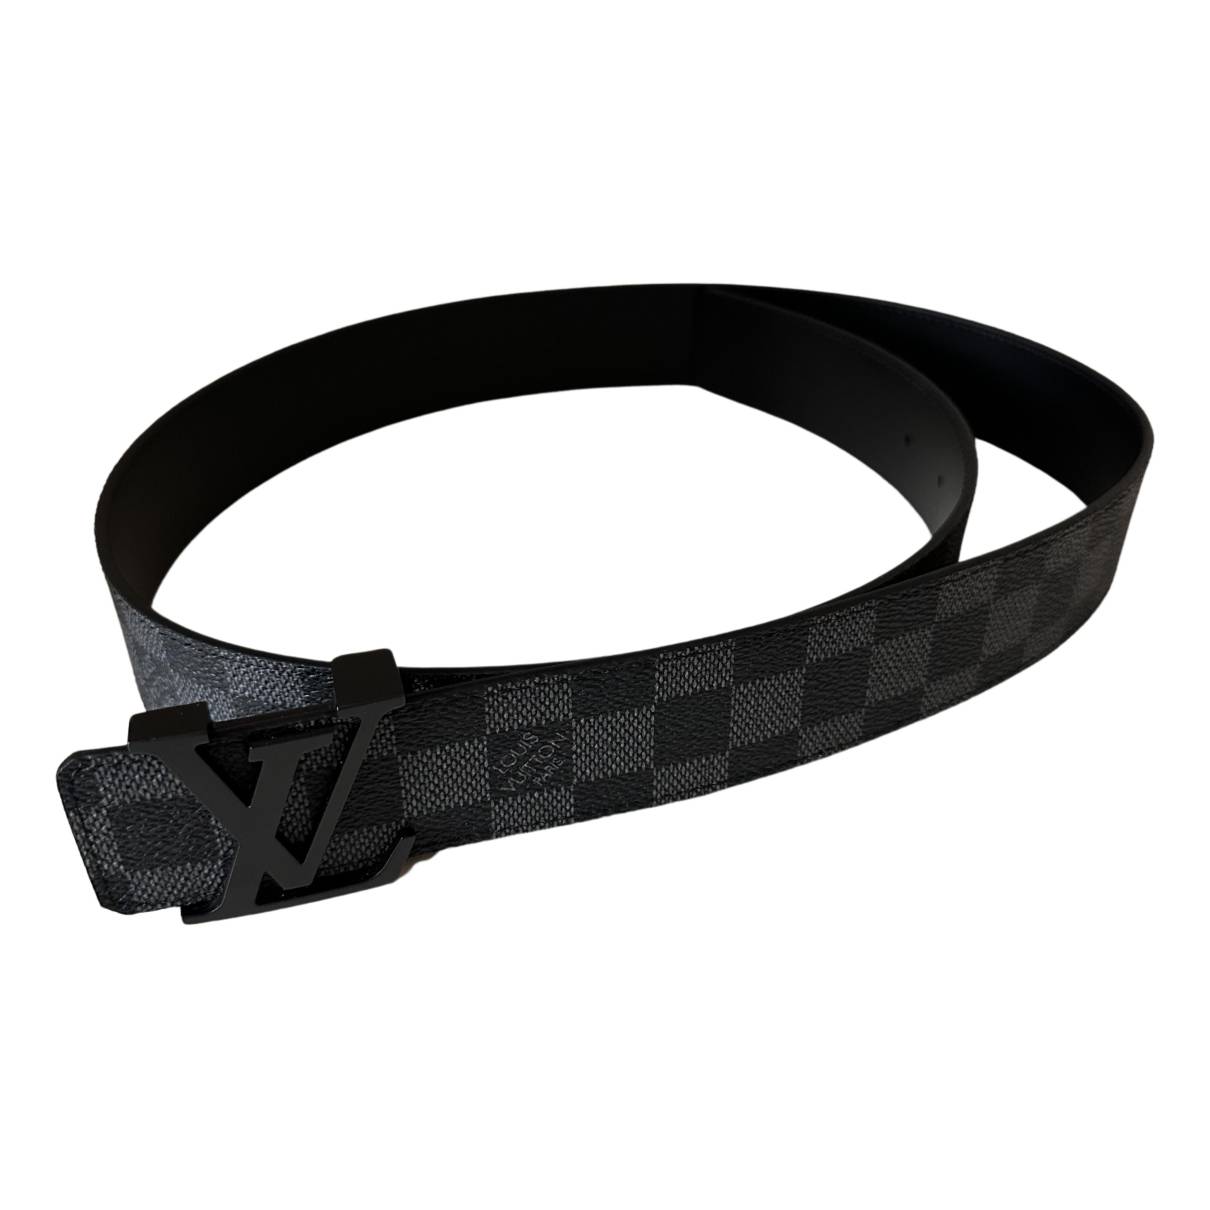 Initiales leather belt Louis Vuitton Anthracite size 100 cm in